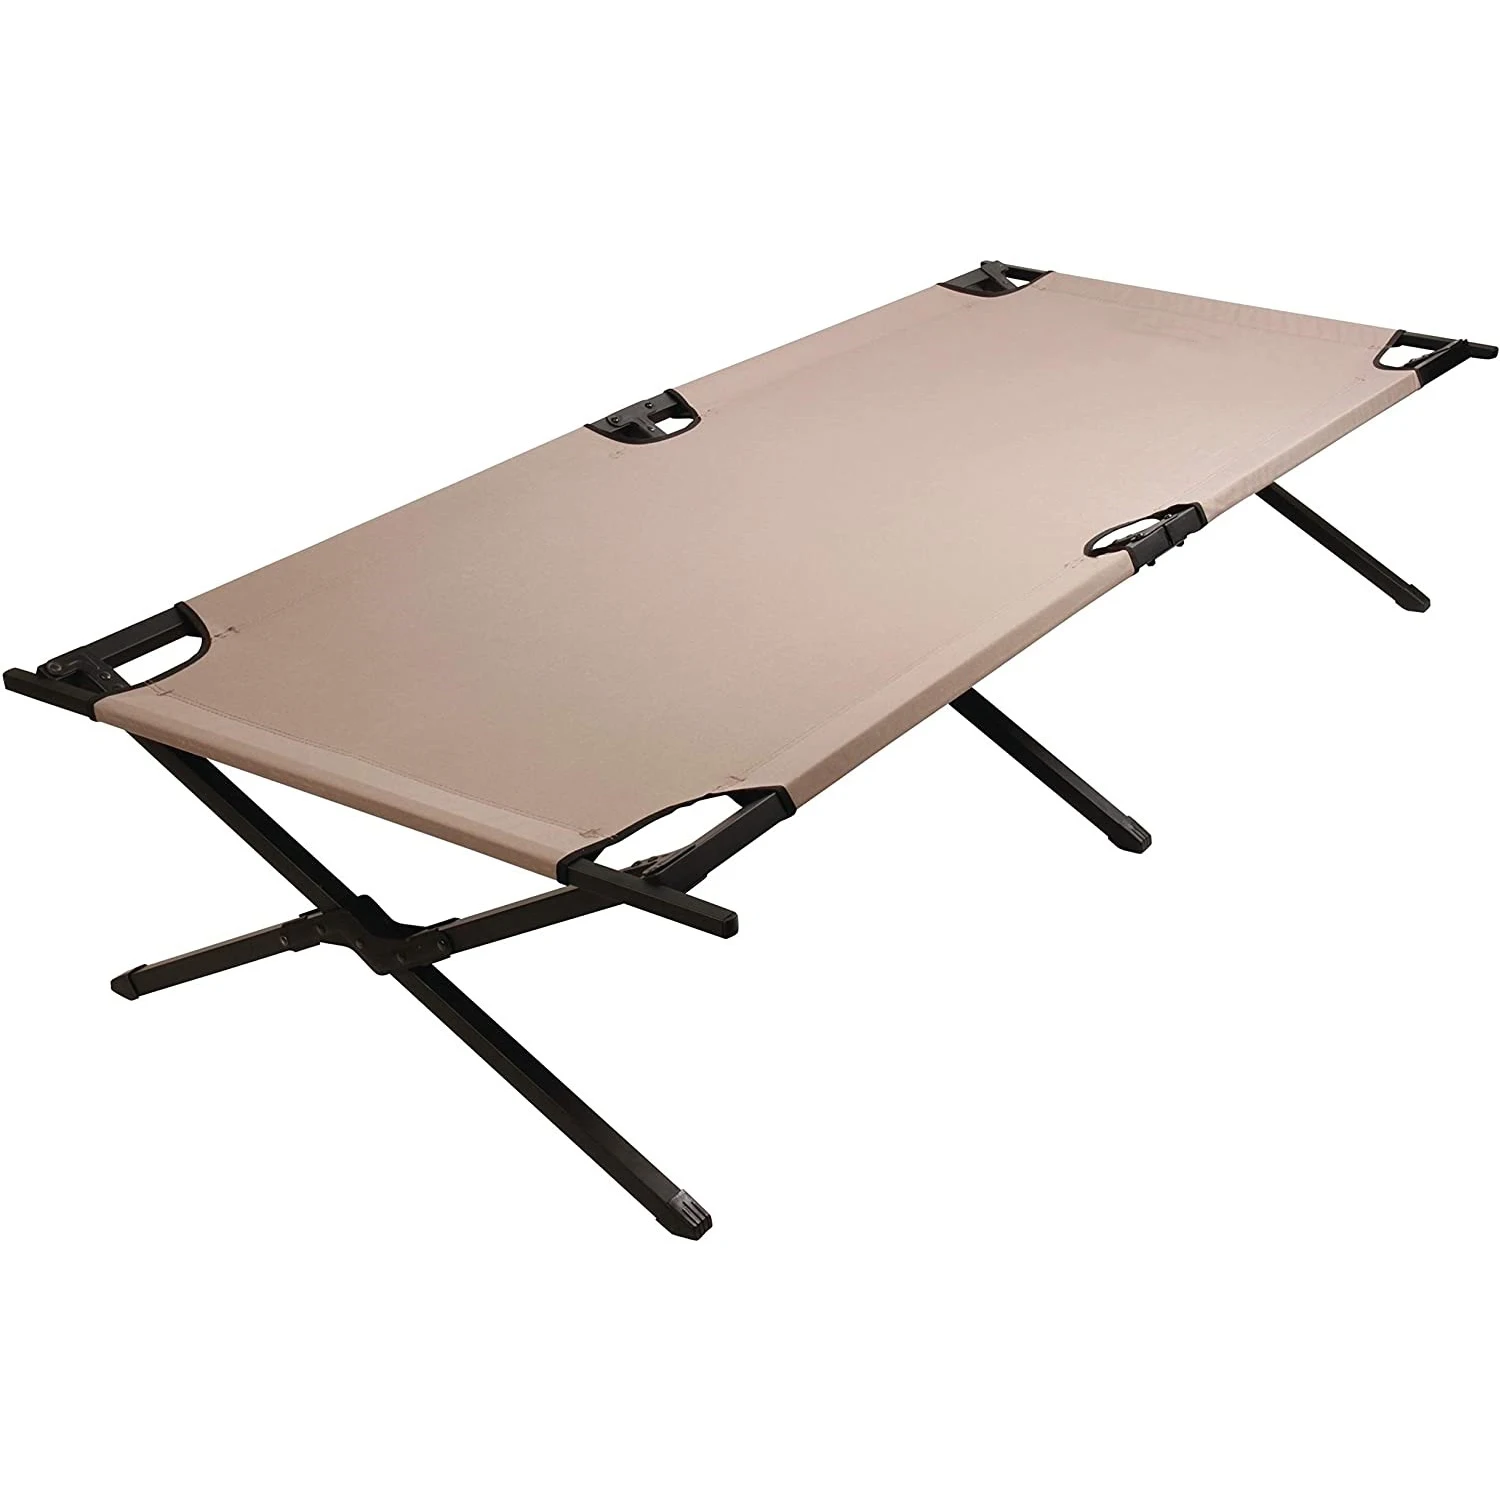 

Popular Camp Cot Oversized Foldable Army Bed Camping Cot Stretcher Outdoor Beds Camping Bed Military, As picture